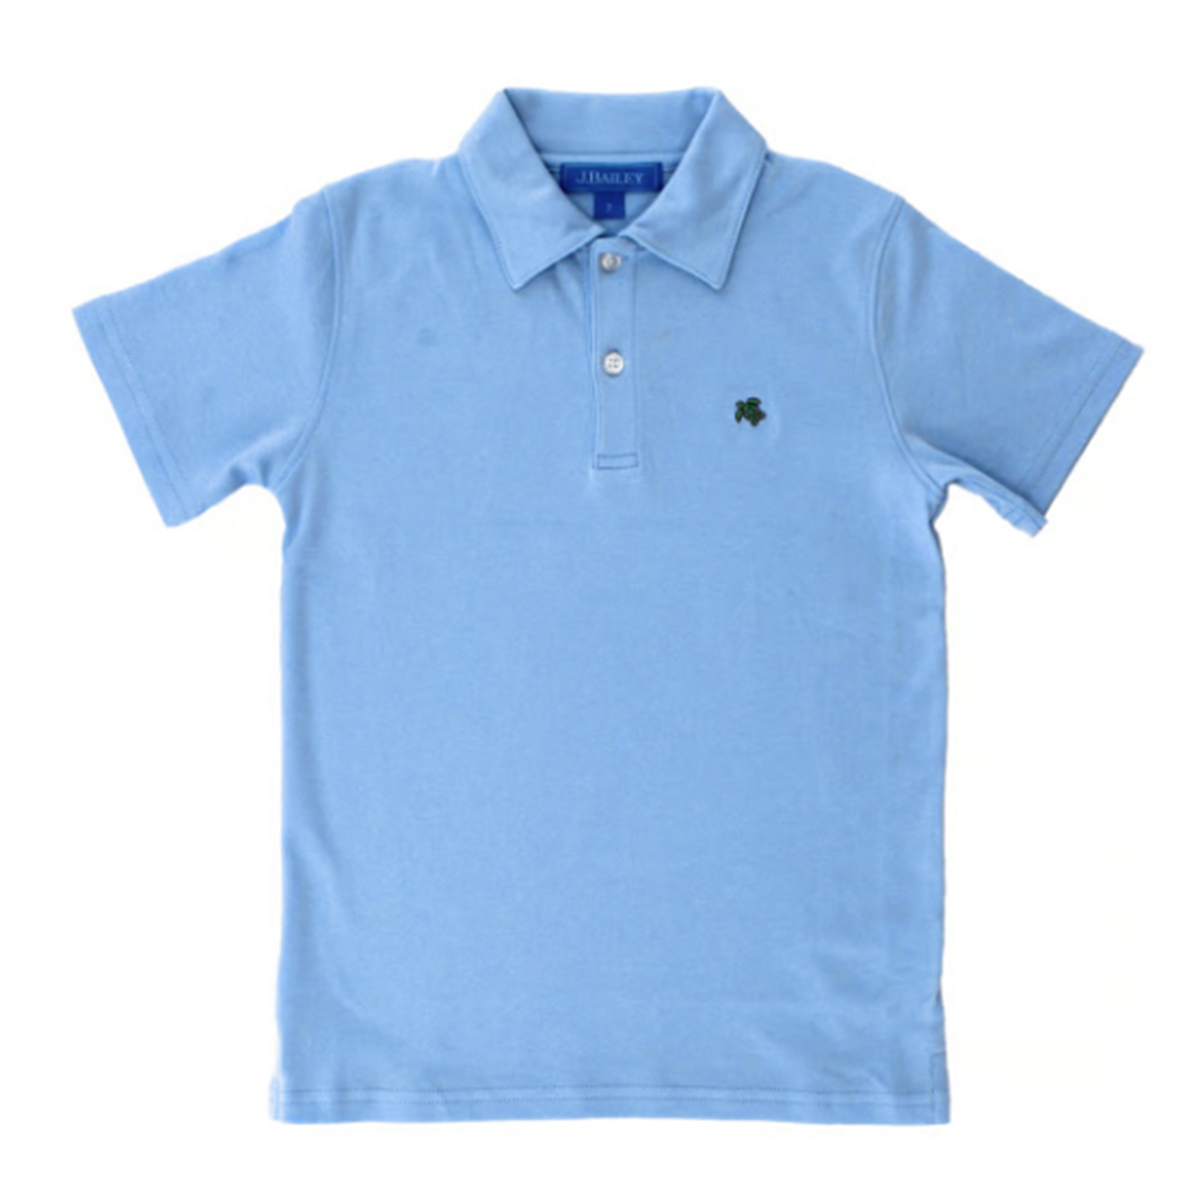 Toddler Boy's Bayberry Blue Polo Shirt by J. Bailey for Bailey Boys